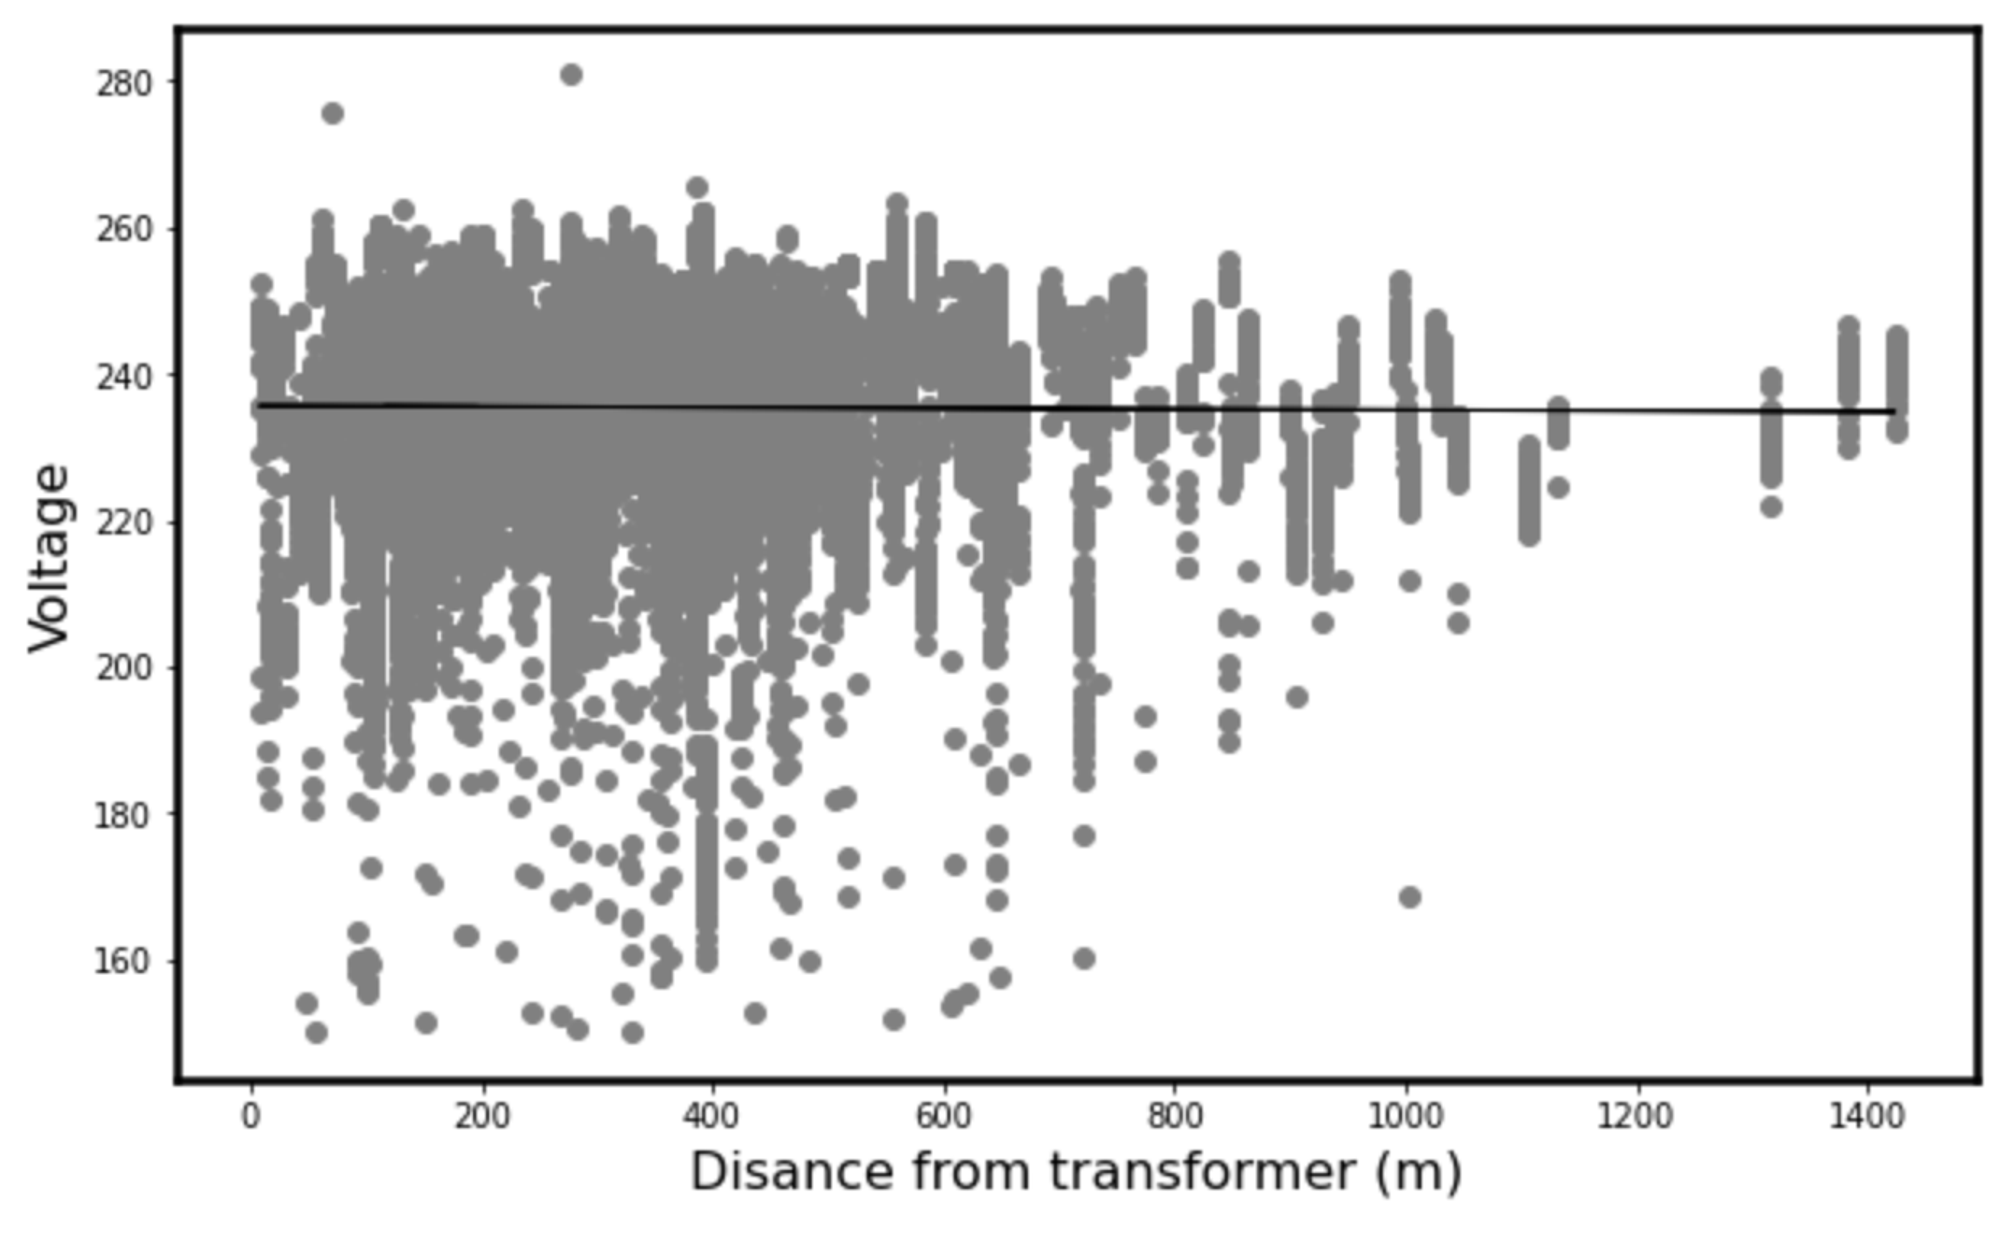 Figure 8: Average daily voltage with distance from the transformer. The distance of a household from the central transformer does not significantly affect the average daily voltage it experiences.